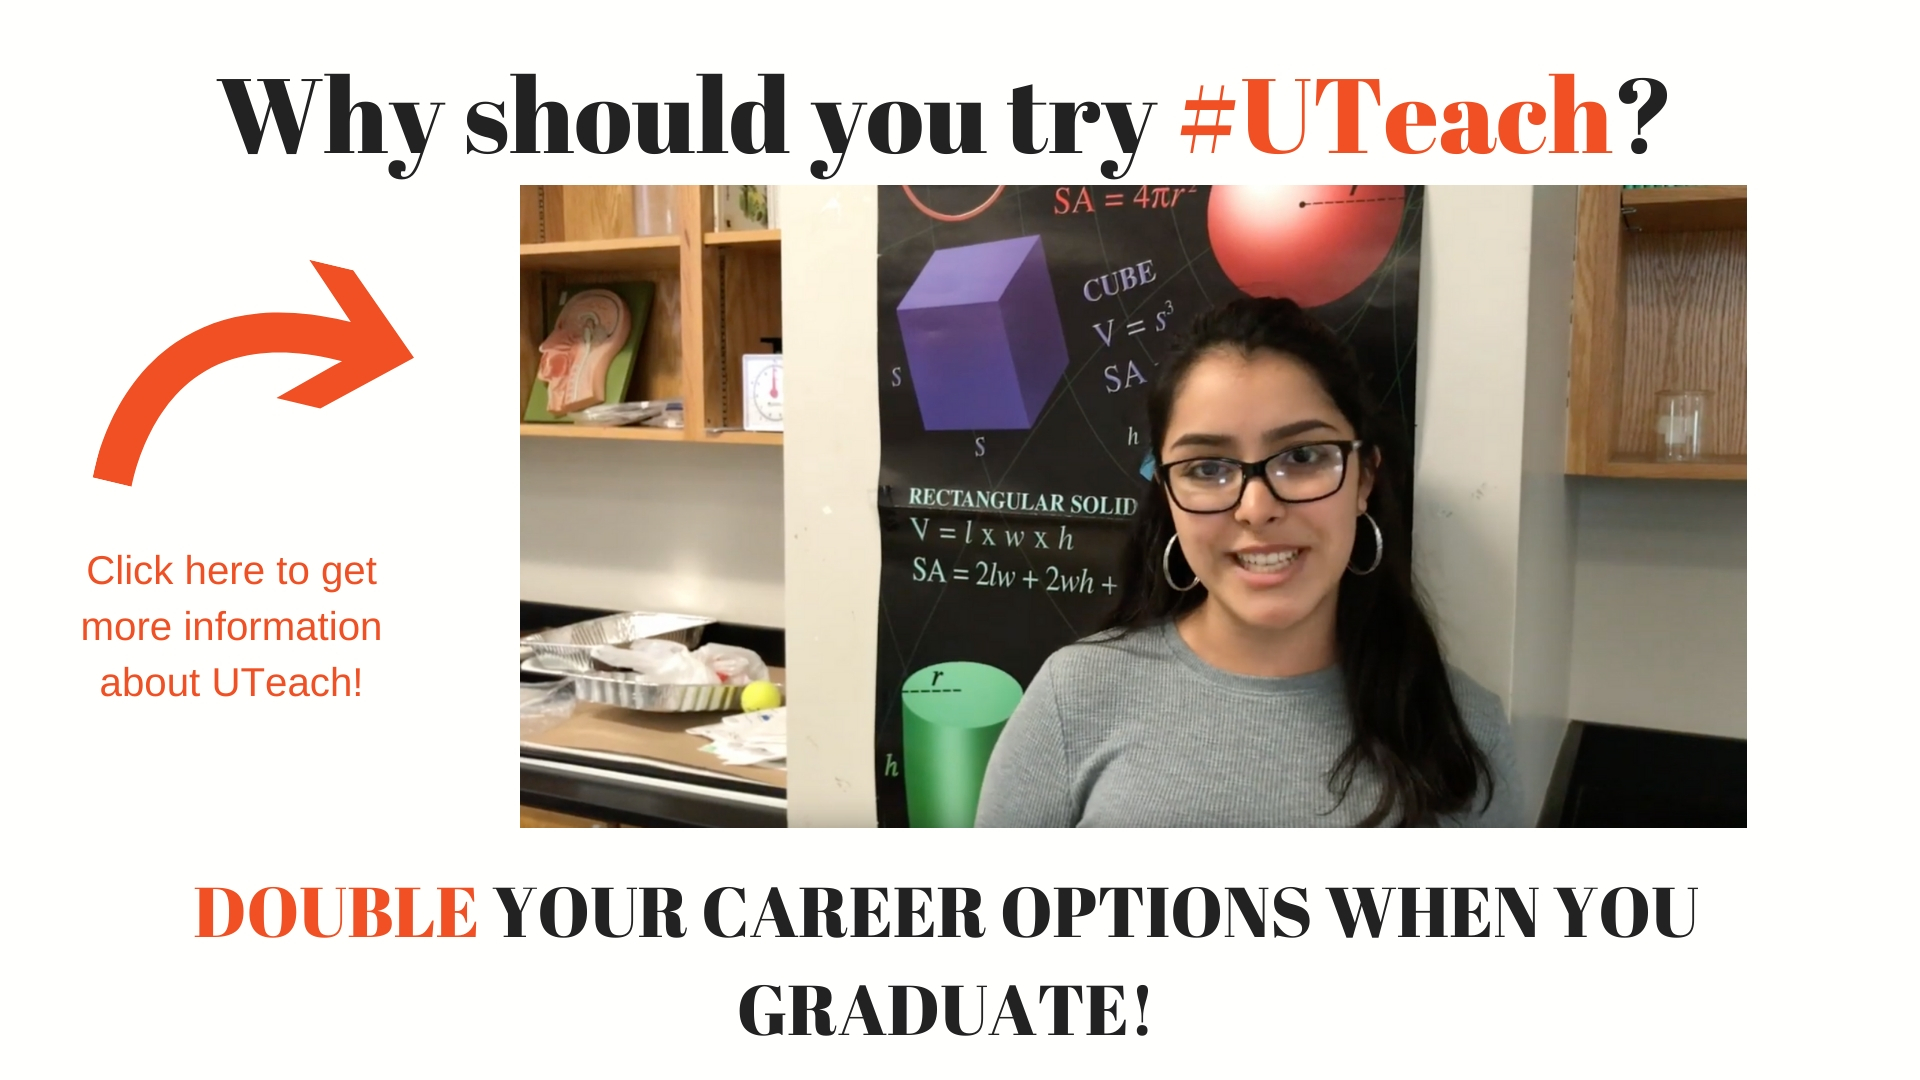 Why should you join UTeach?